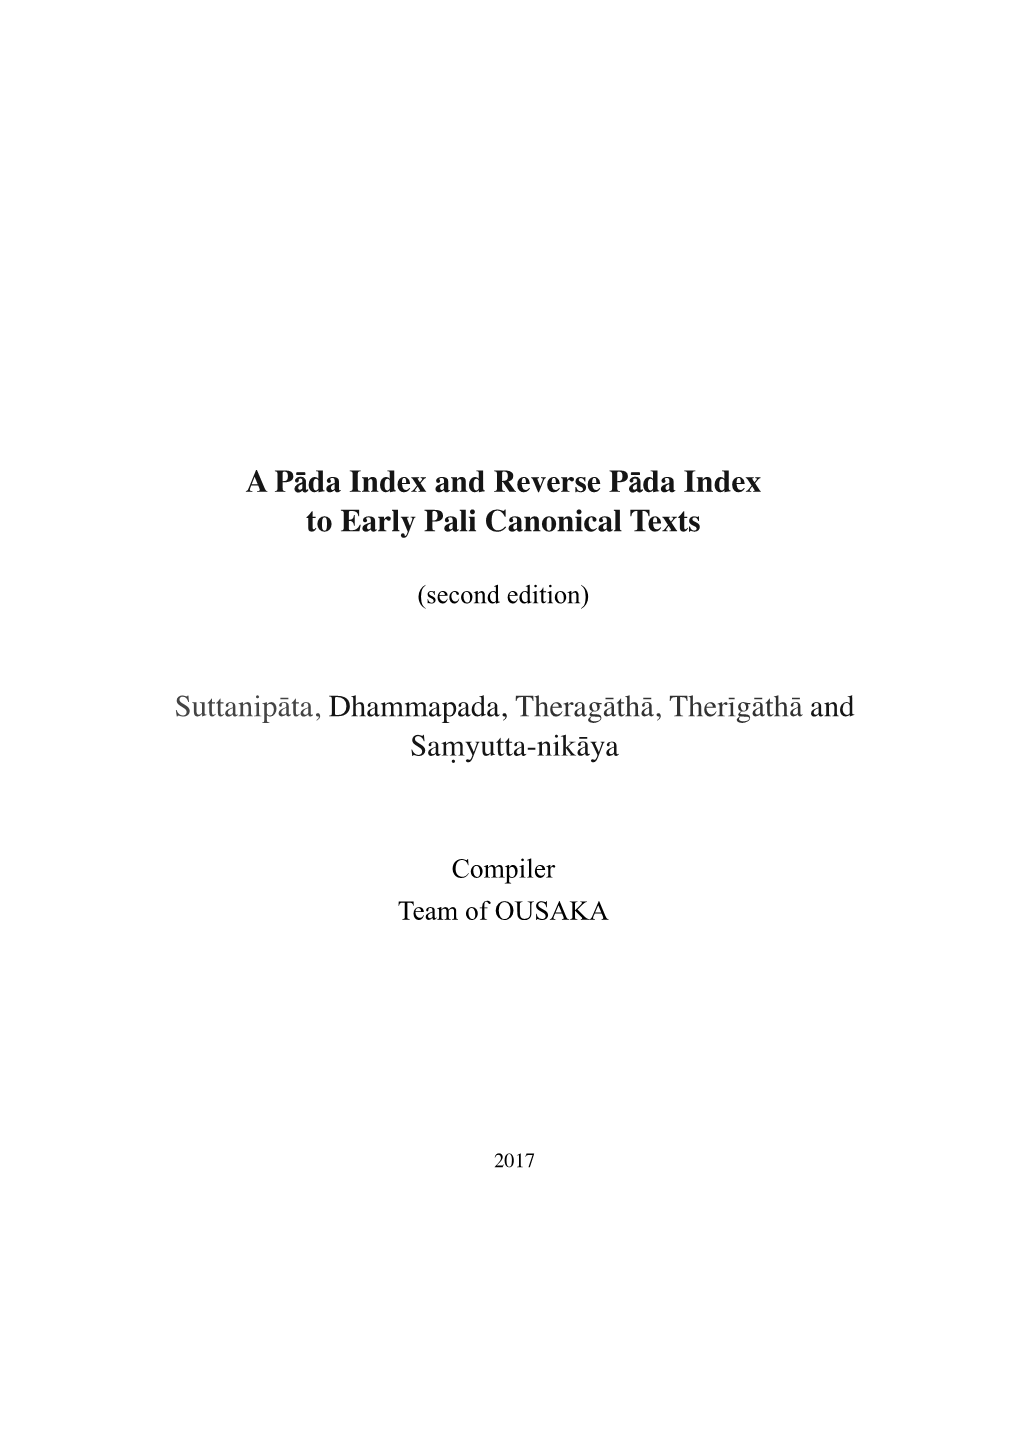 A Pada Index and Reverse Pada Index to Early Pali Canonical Texts